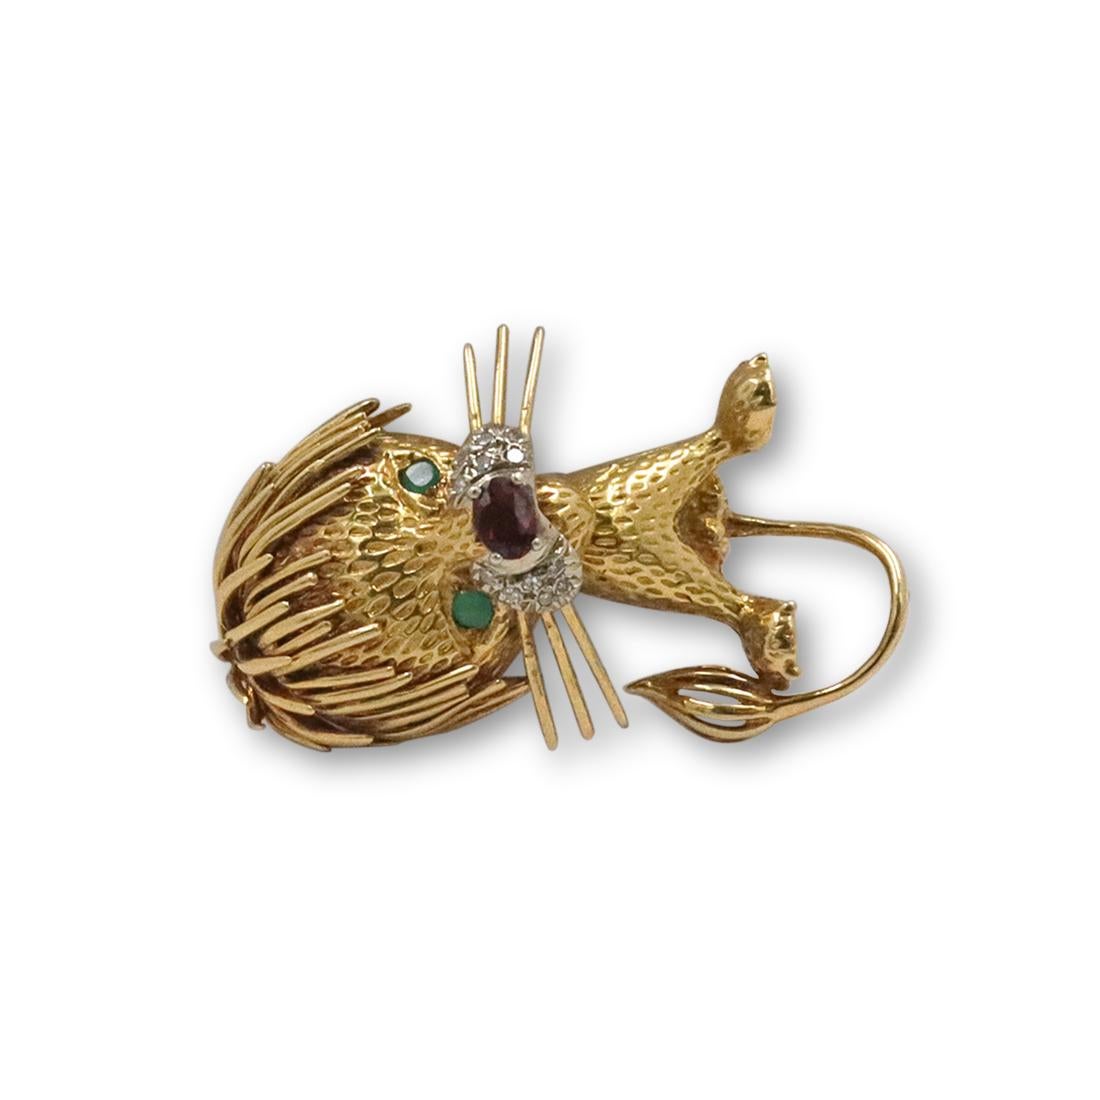 Authentic Cartier 'Whimsical Lion' brooch crafted in 18 karat yellow gold set with single cut diamonds weighing an estimated .05 carats total. This amusing brooch, designed as a playful lion with a tousled mane features a garnet nose and vibrant